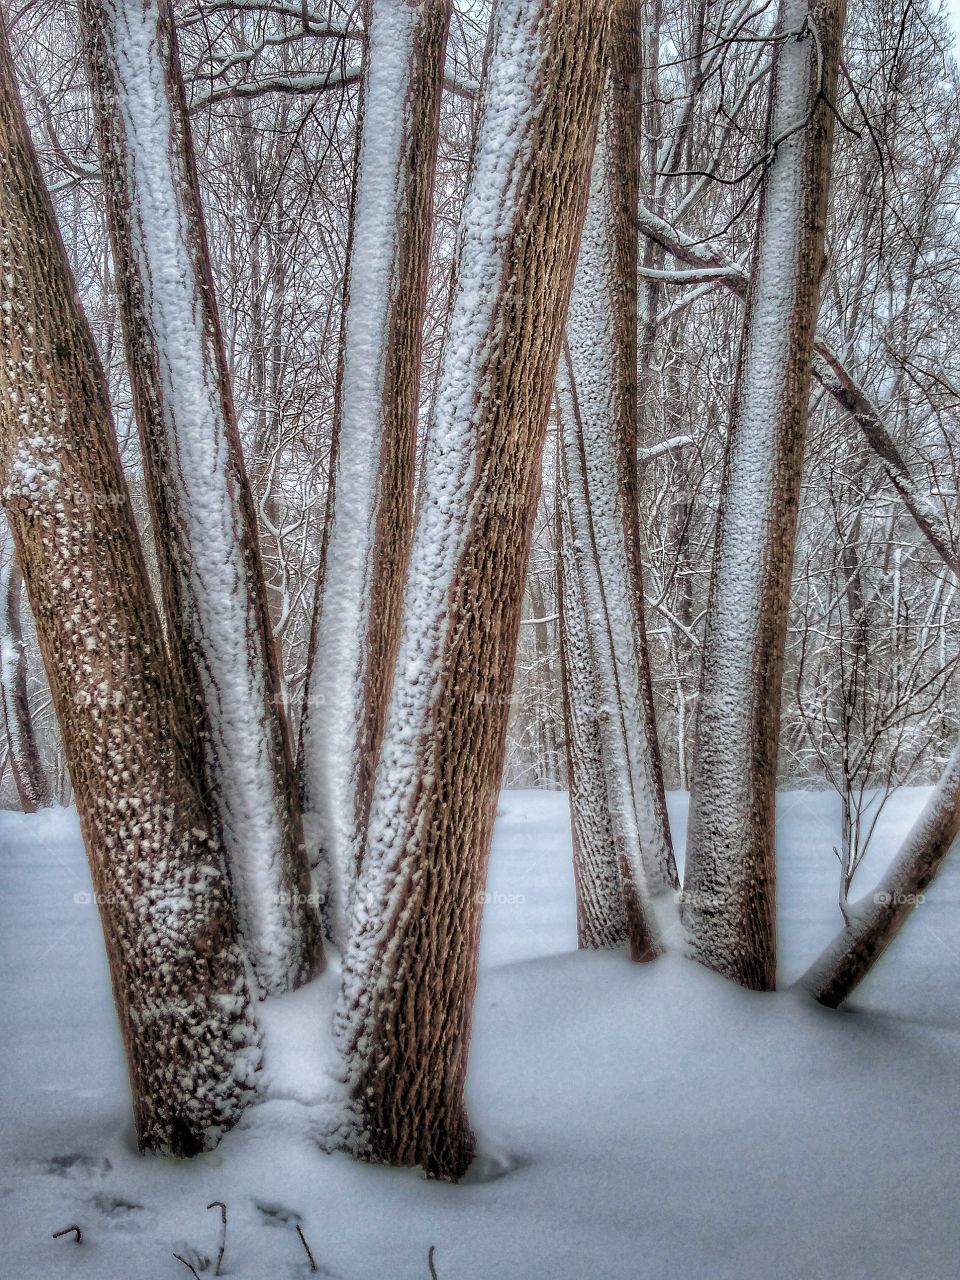 group of trees with new snowfall sticking on bark